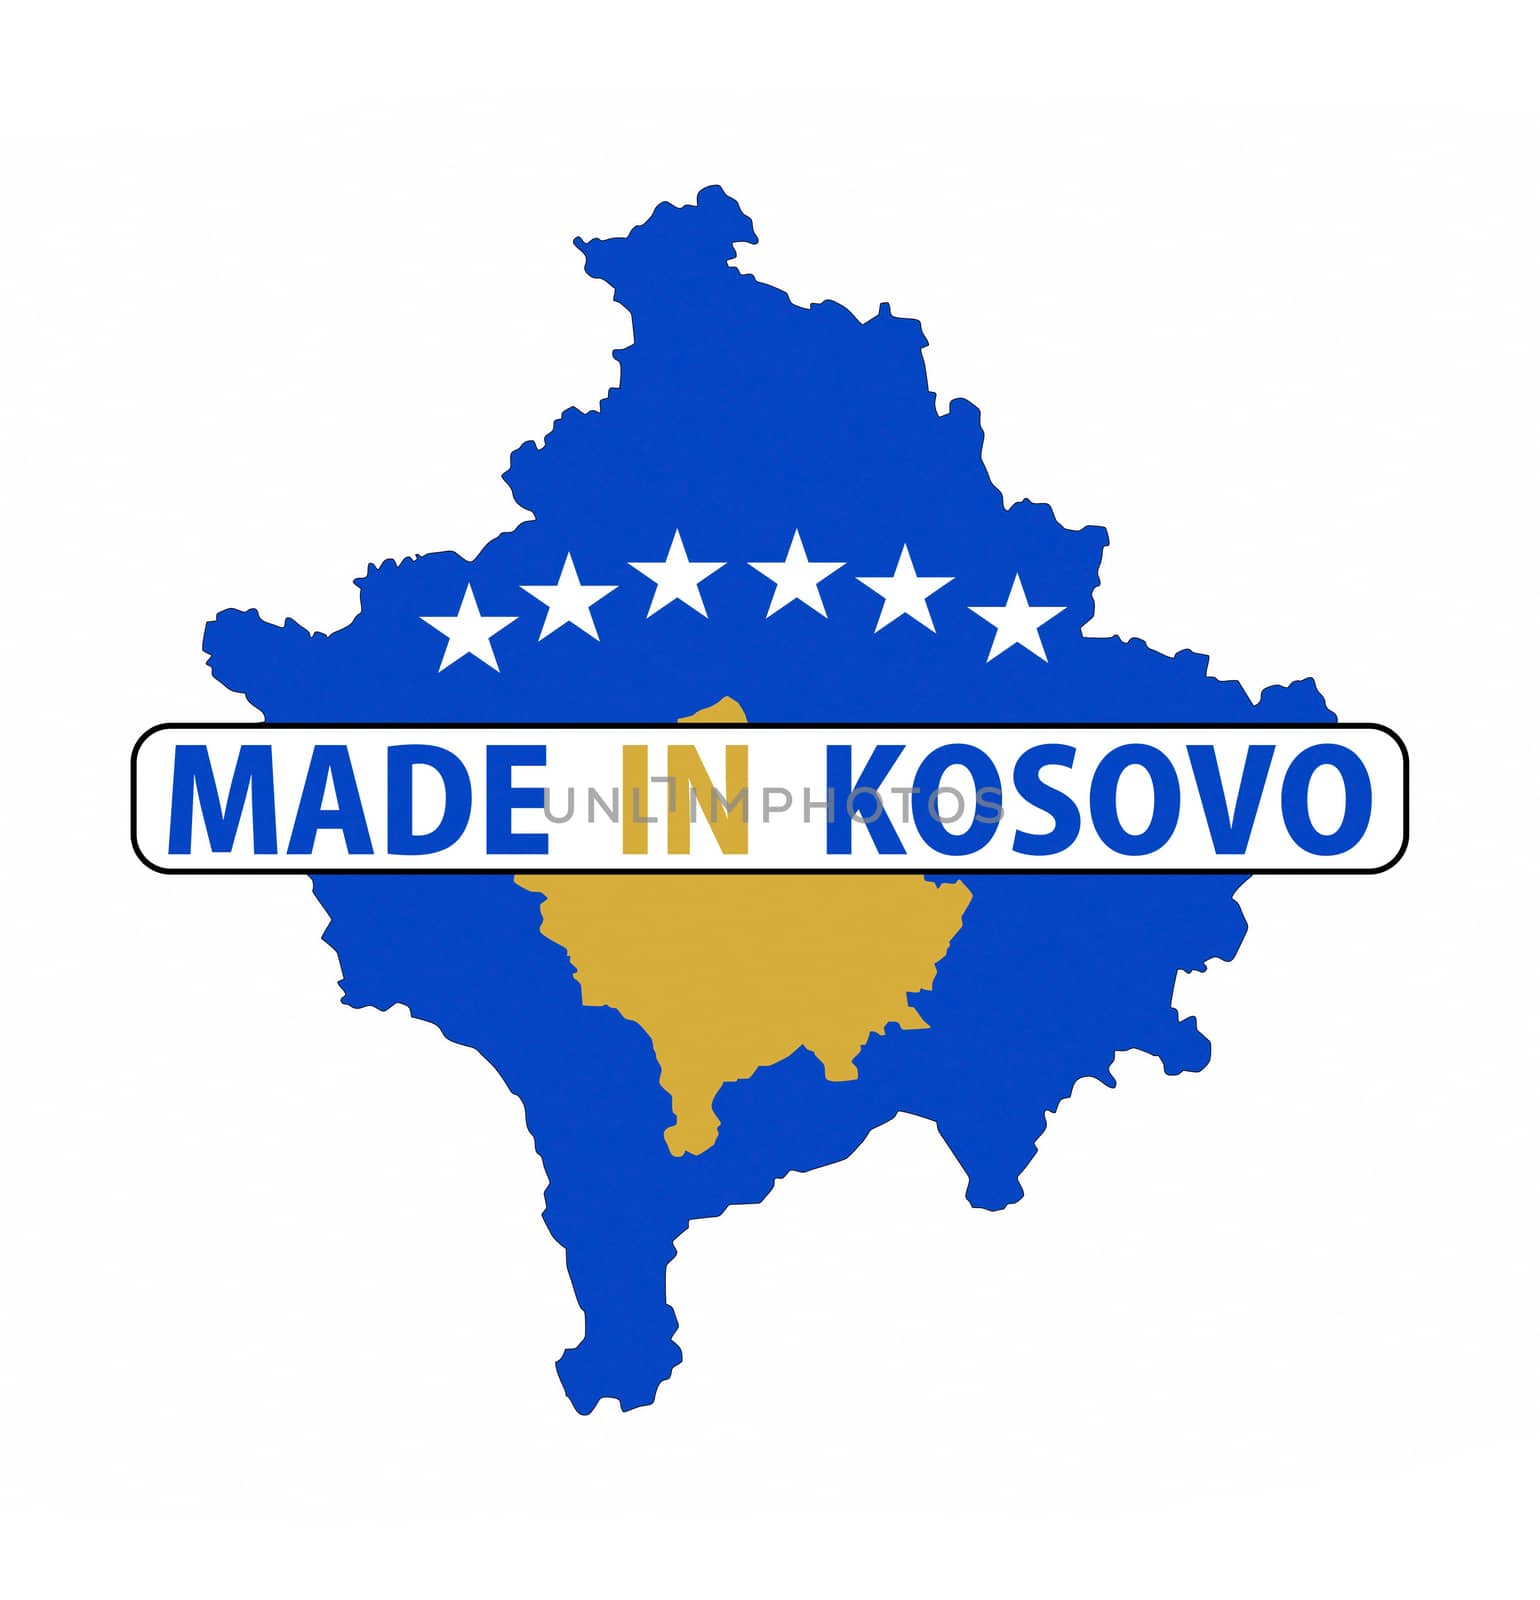 made in kosovo country national flag map shape with text